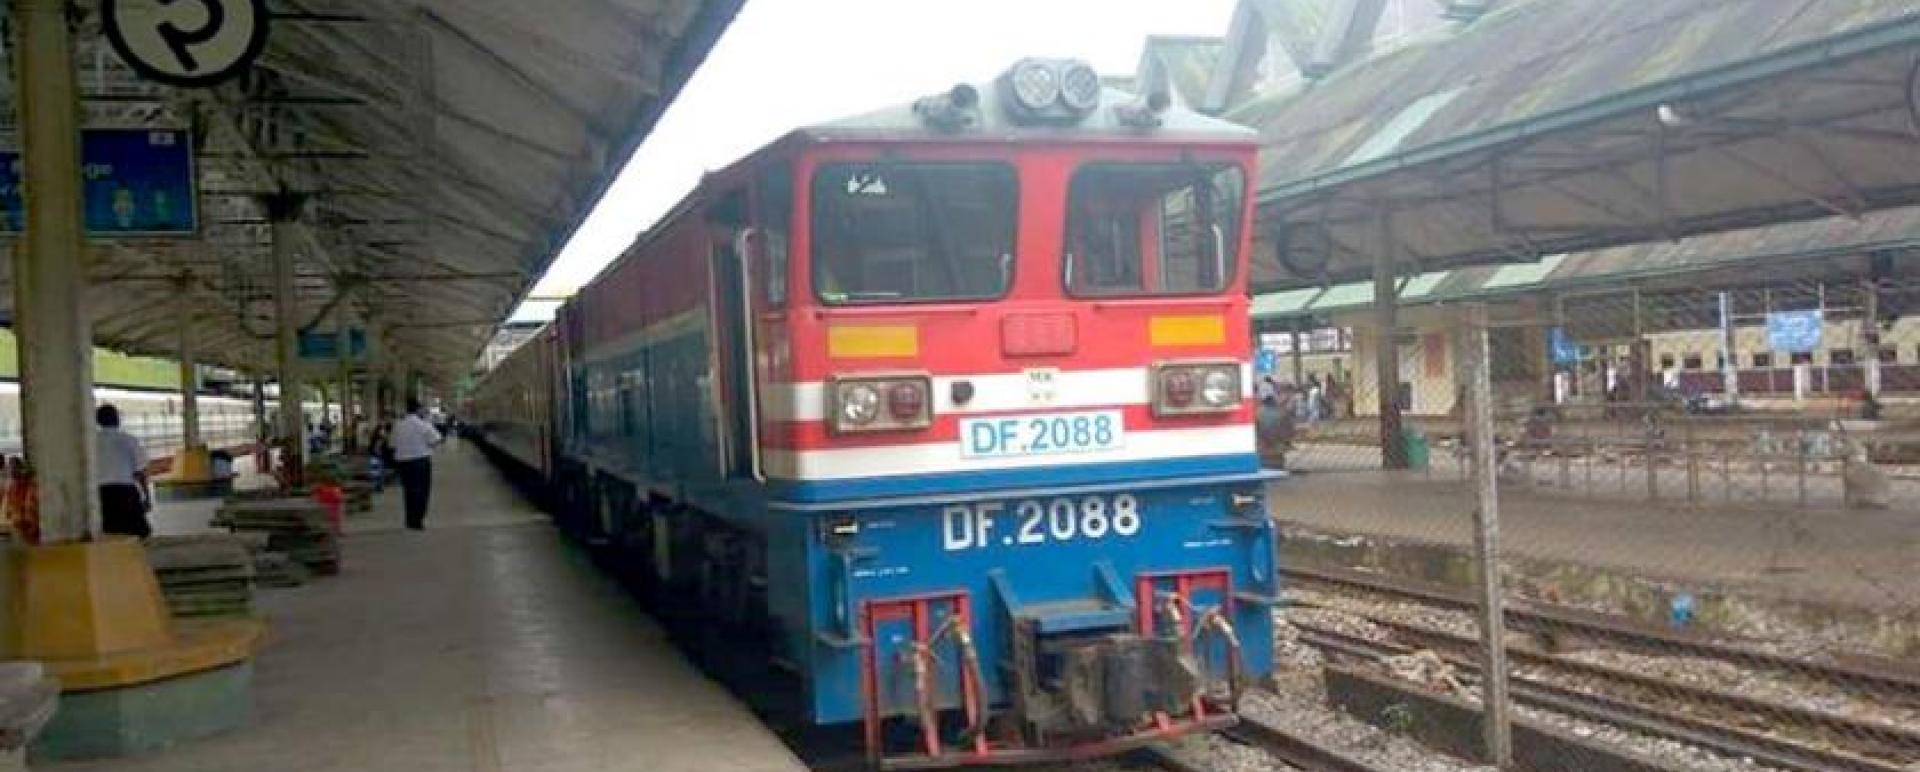 Myanmar Railways (MR) plans to sign an agreement with Korea EXIM Bank to take loans for the upgrading of Mandalay – Myintgyina railroad